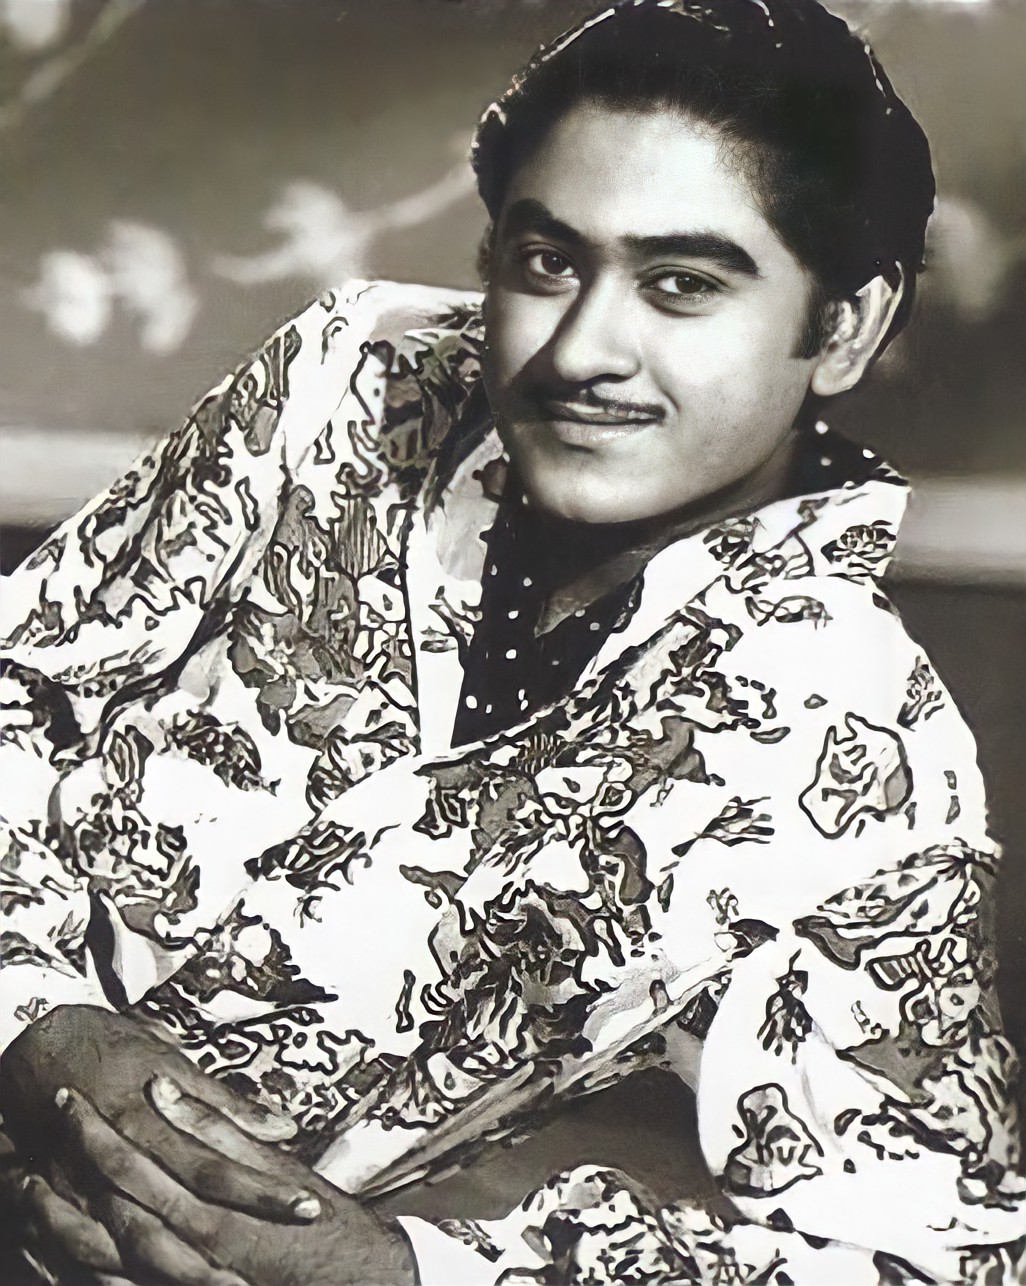 facts about kishore kumar